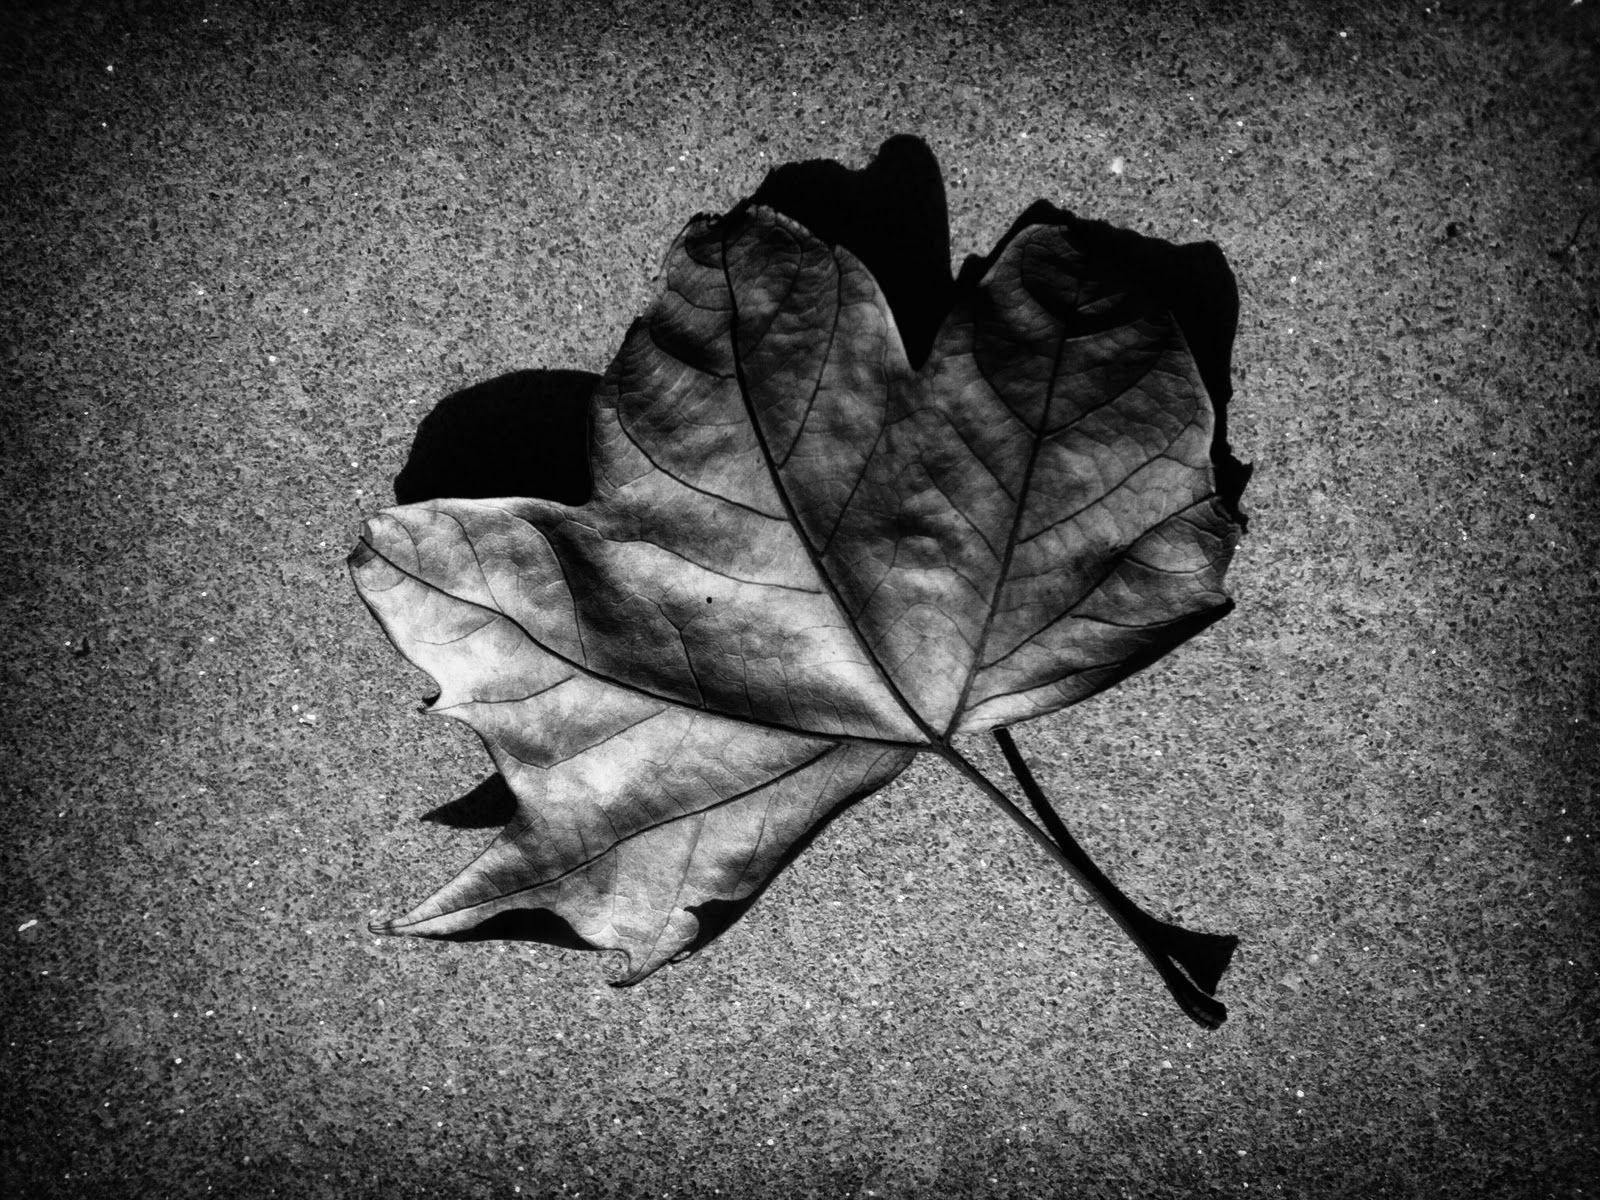 Autumn Leaf Black and White, High Definition, High Quality, Widescreen